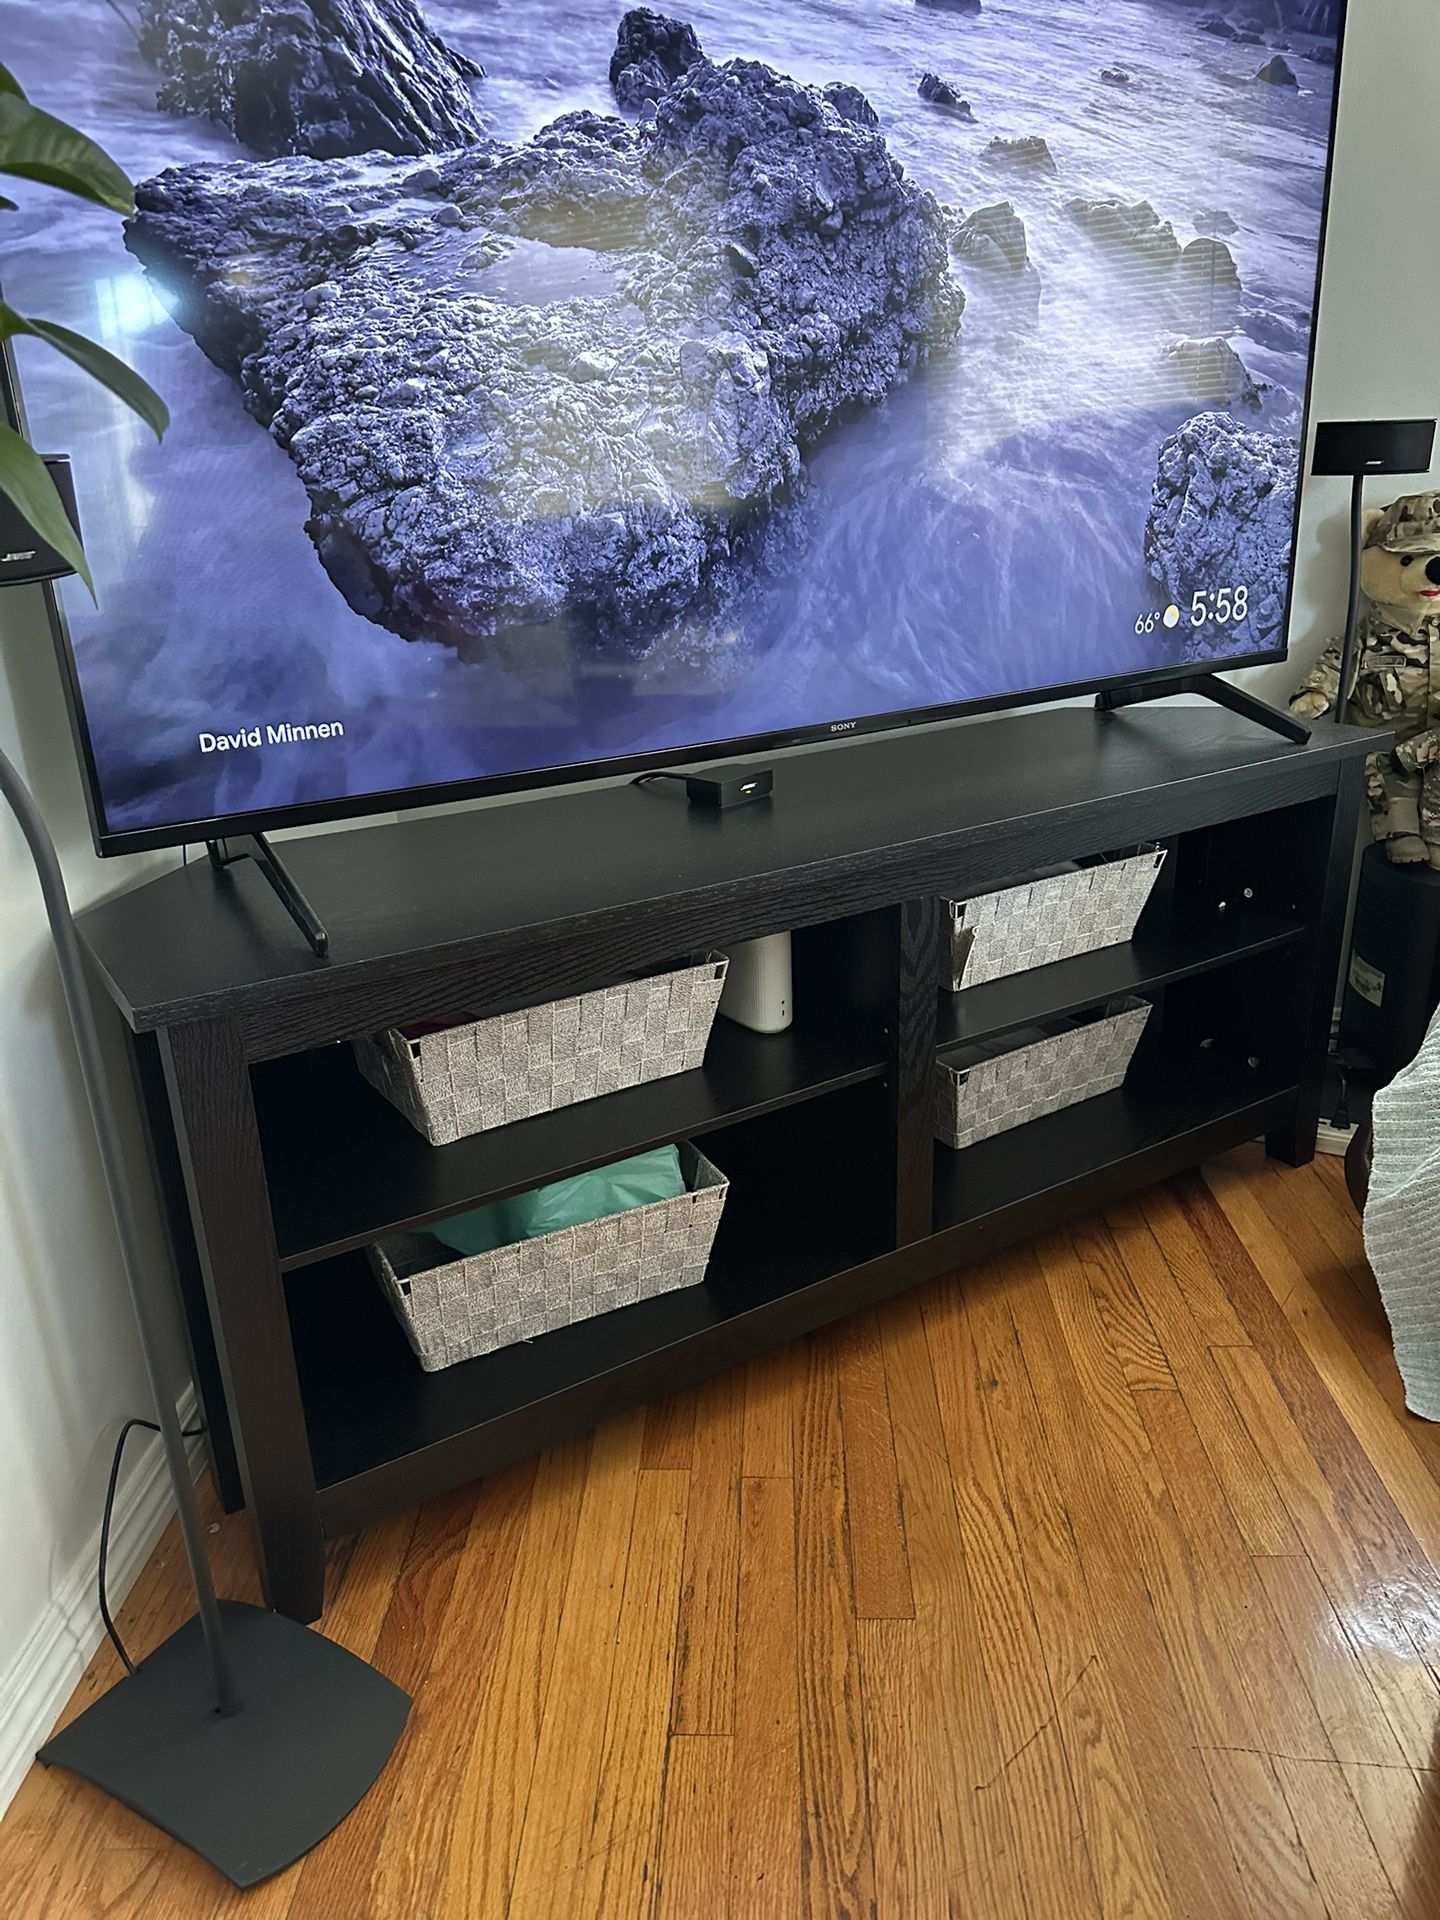 Tv Stand Only For Sale